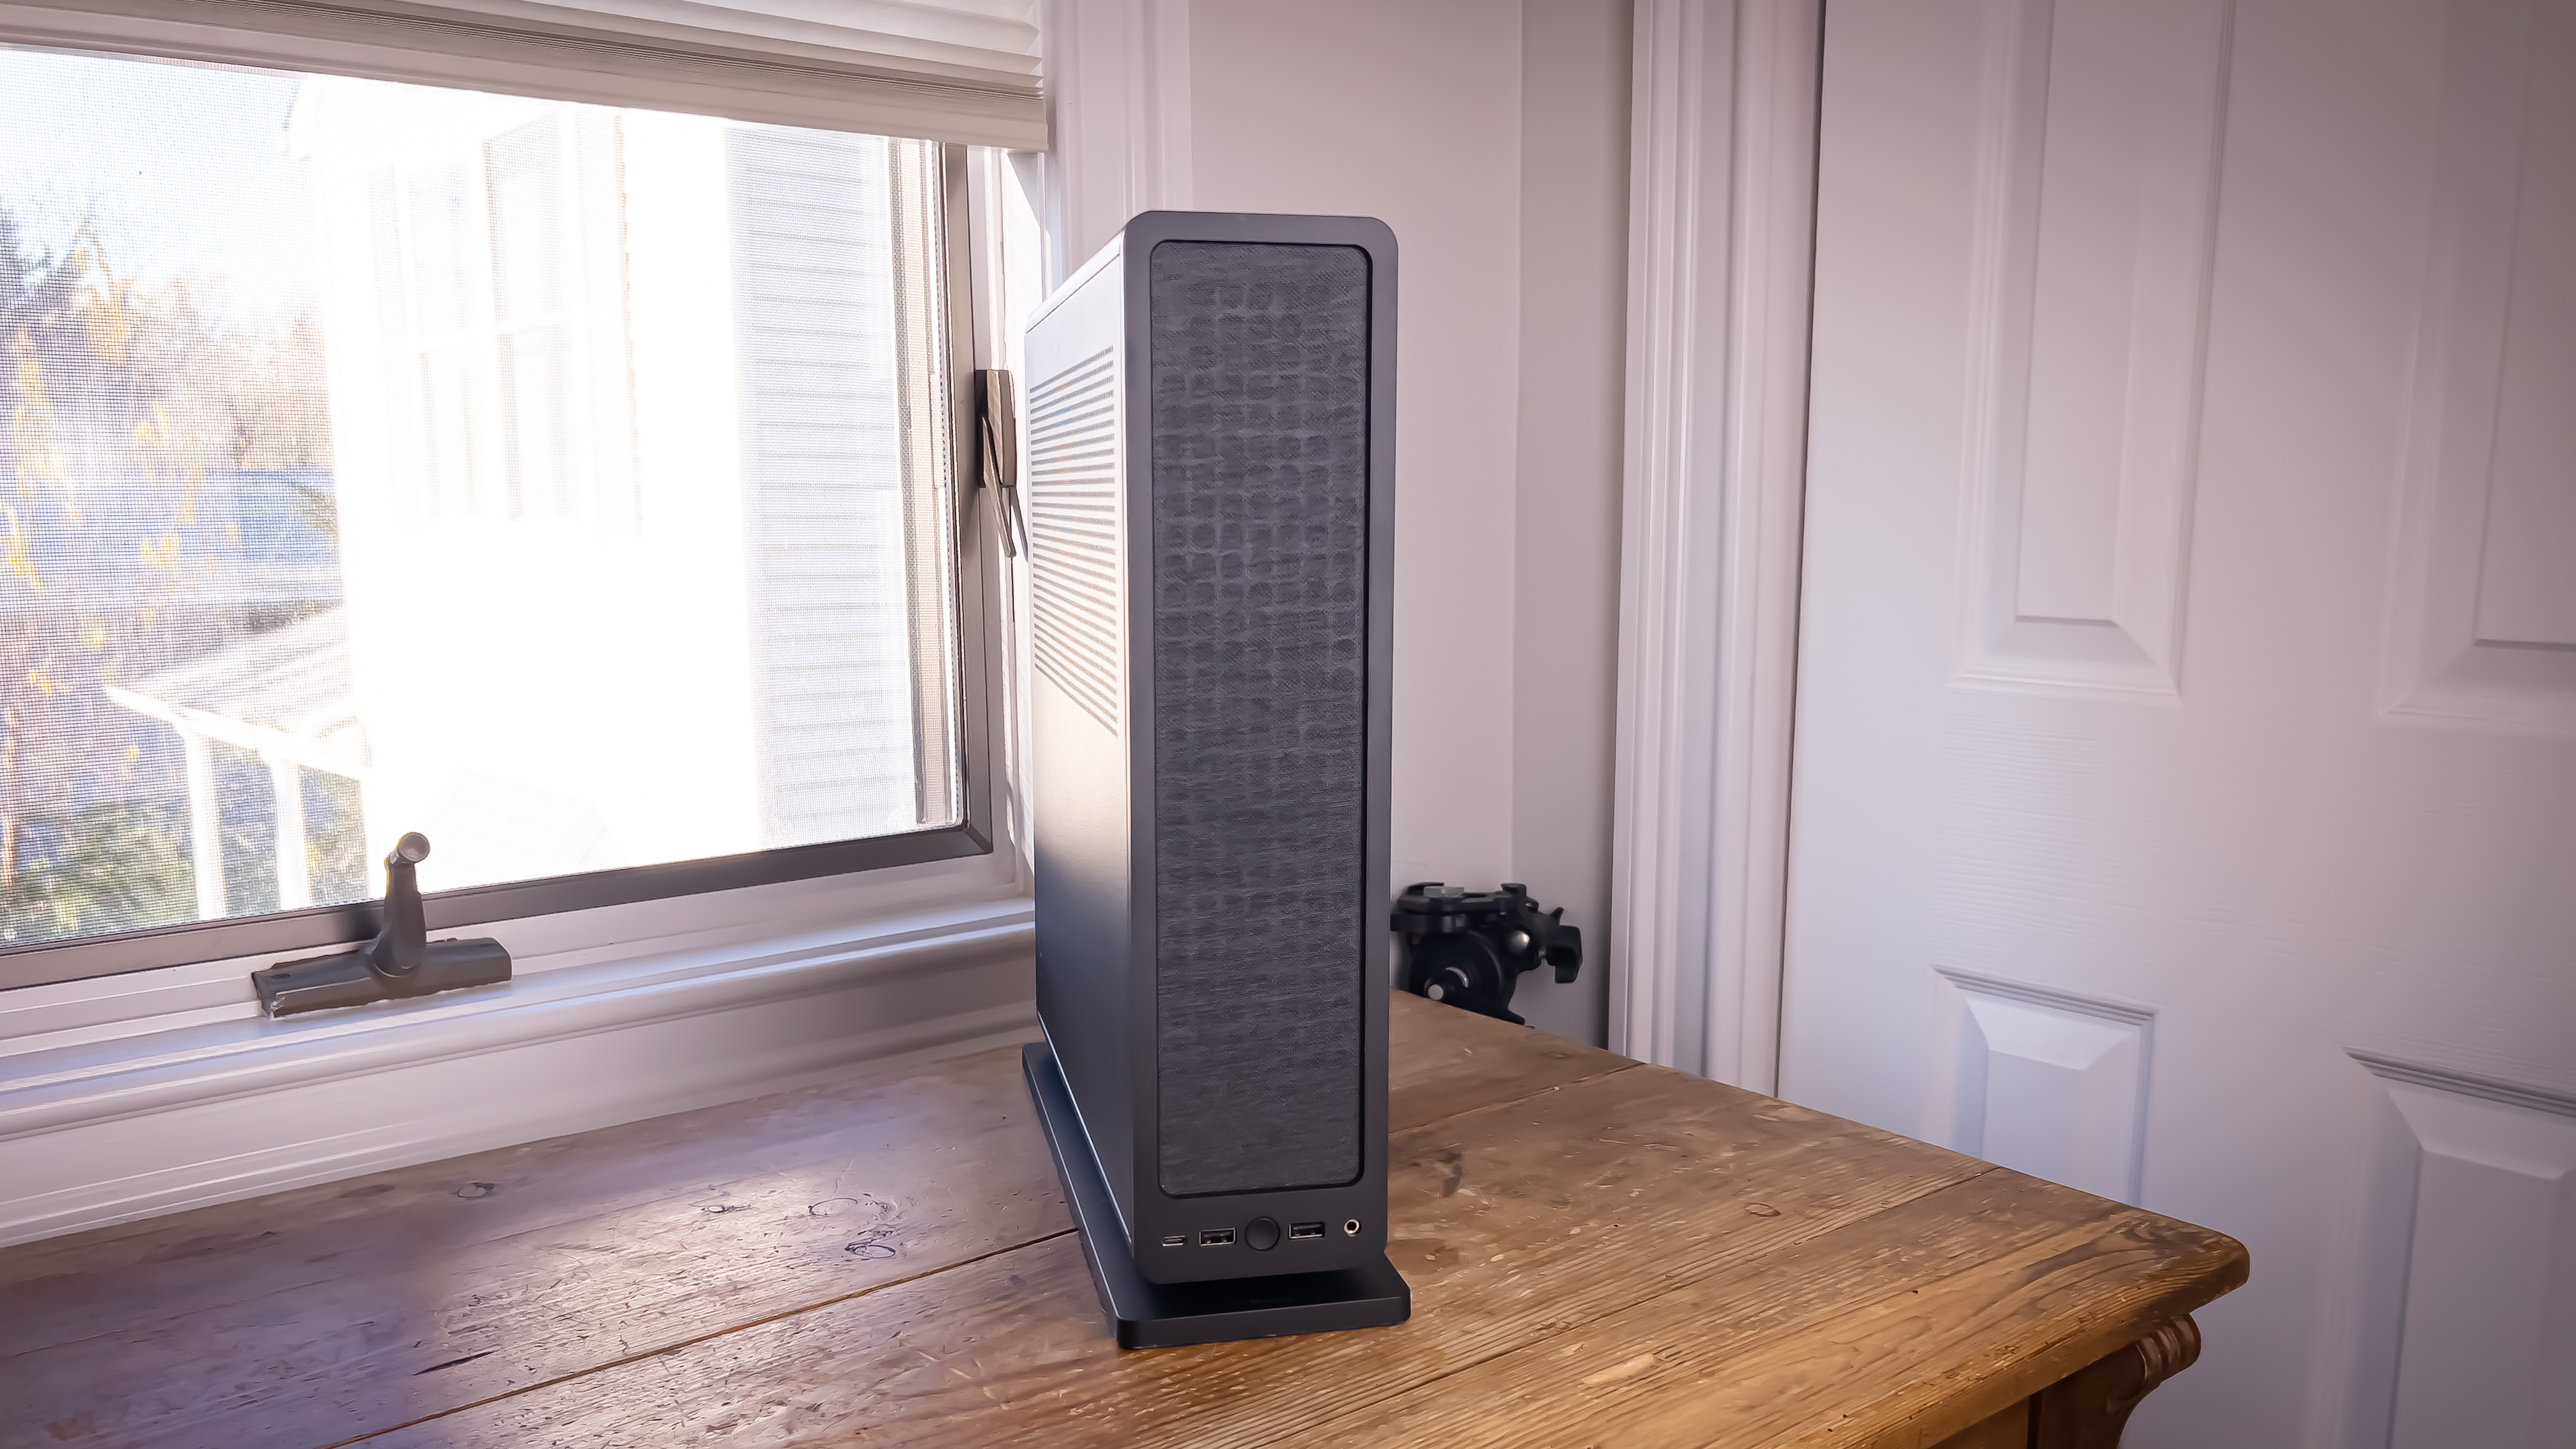 Fractal Design Ridge Review: Tall, Slim and Somewhat Roomy